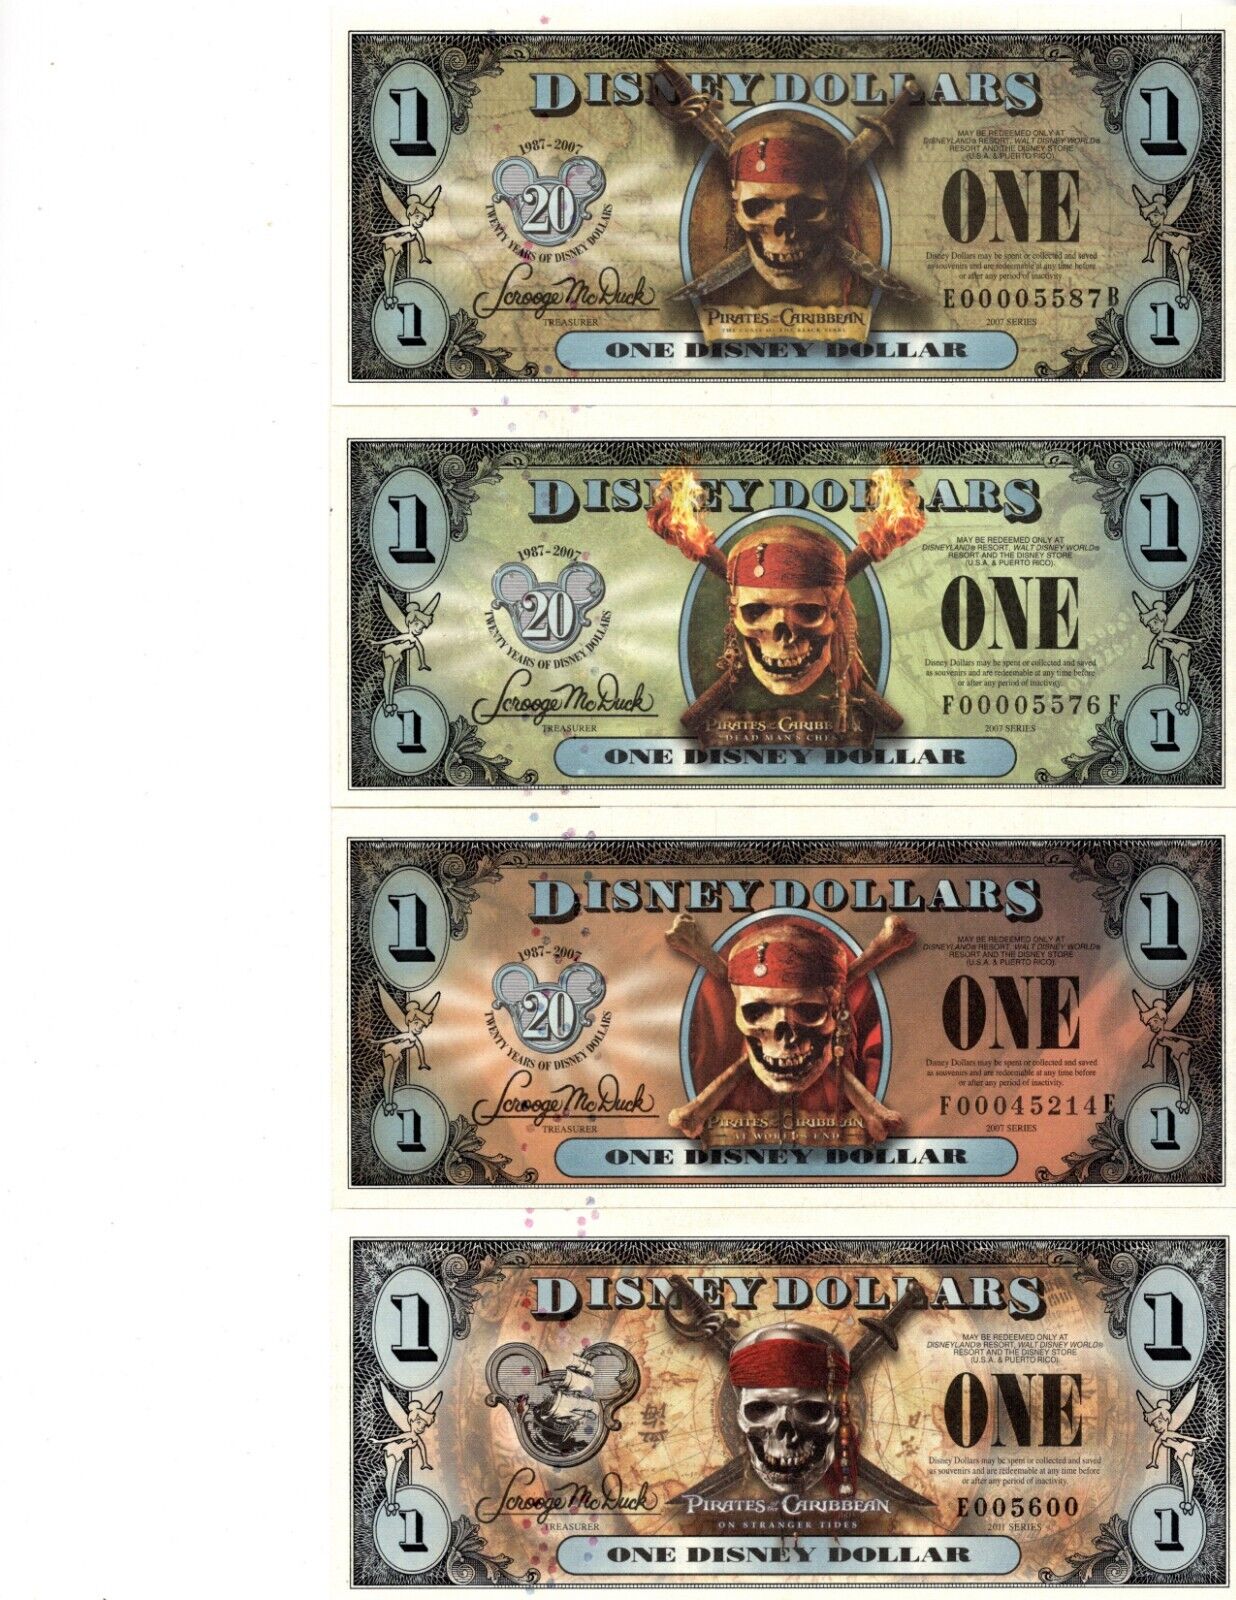 Very Scarce Set of All 4 2007 & 2011 Pirate of the Caribbean Disney Dollars